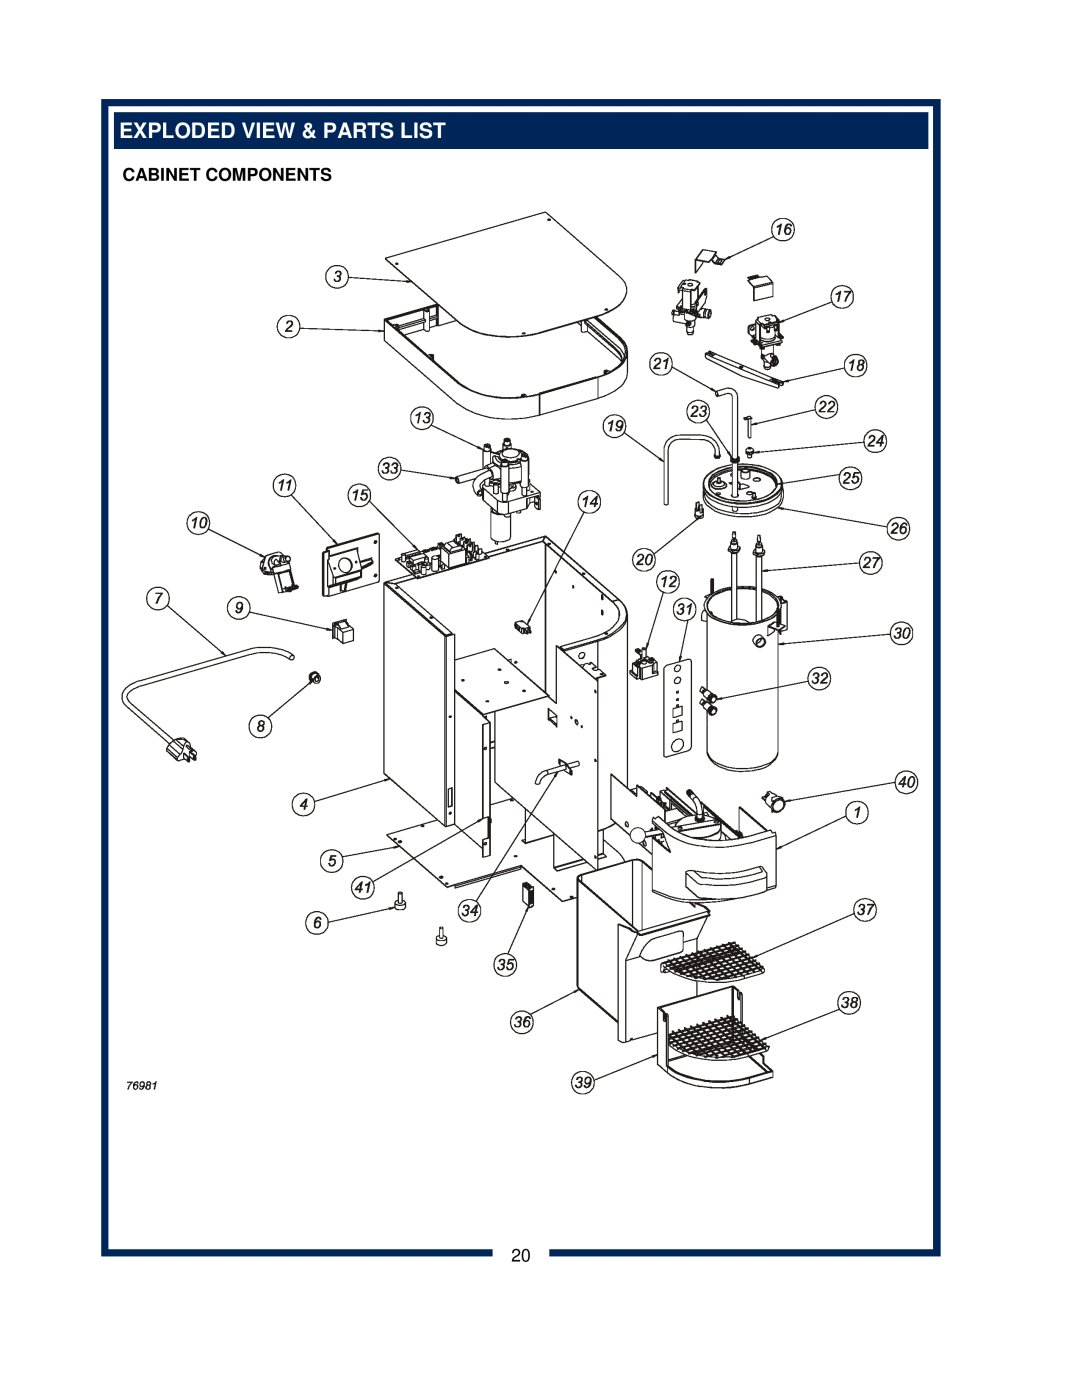 Bloomfield 9600 Single Cup owner manual Exploded View & Parts List, Cabinet Components 